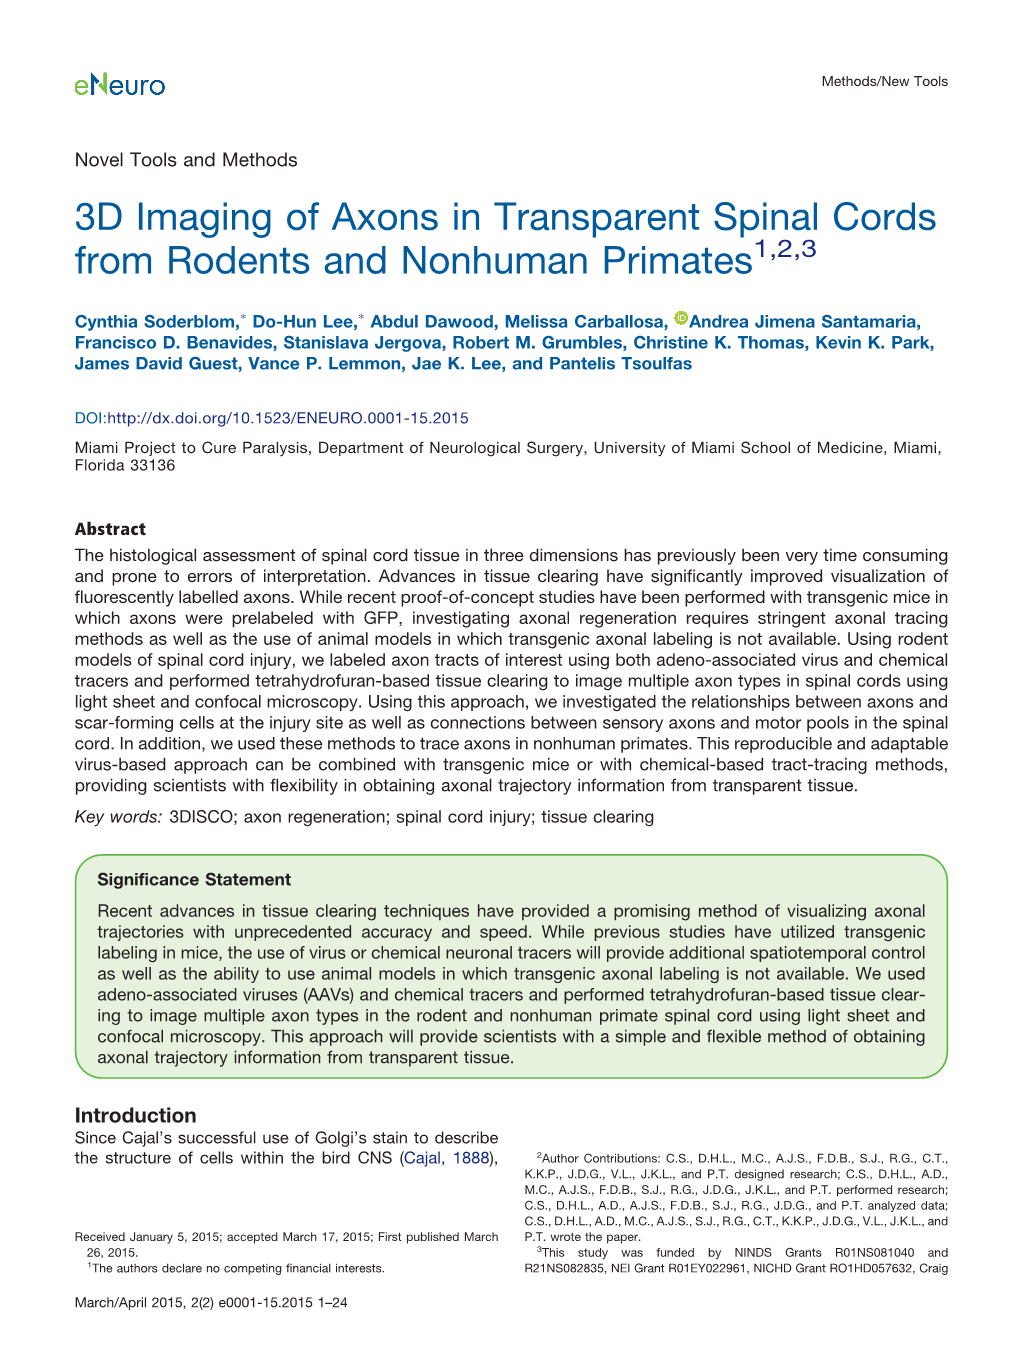 3D Imaging of Axons in Transparent Spinal Cords from Rodents and Nonhuman Primates1,2,3